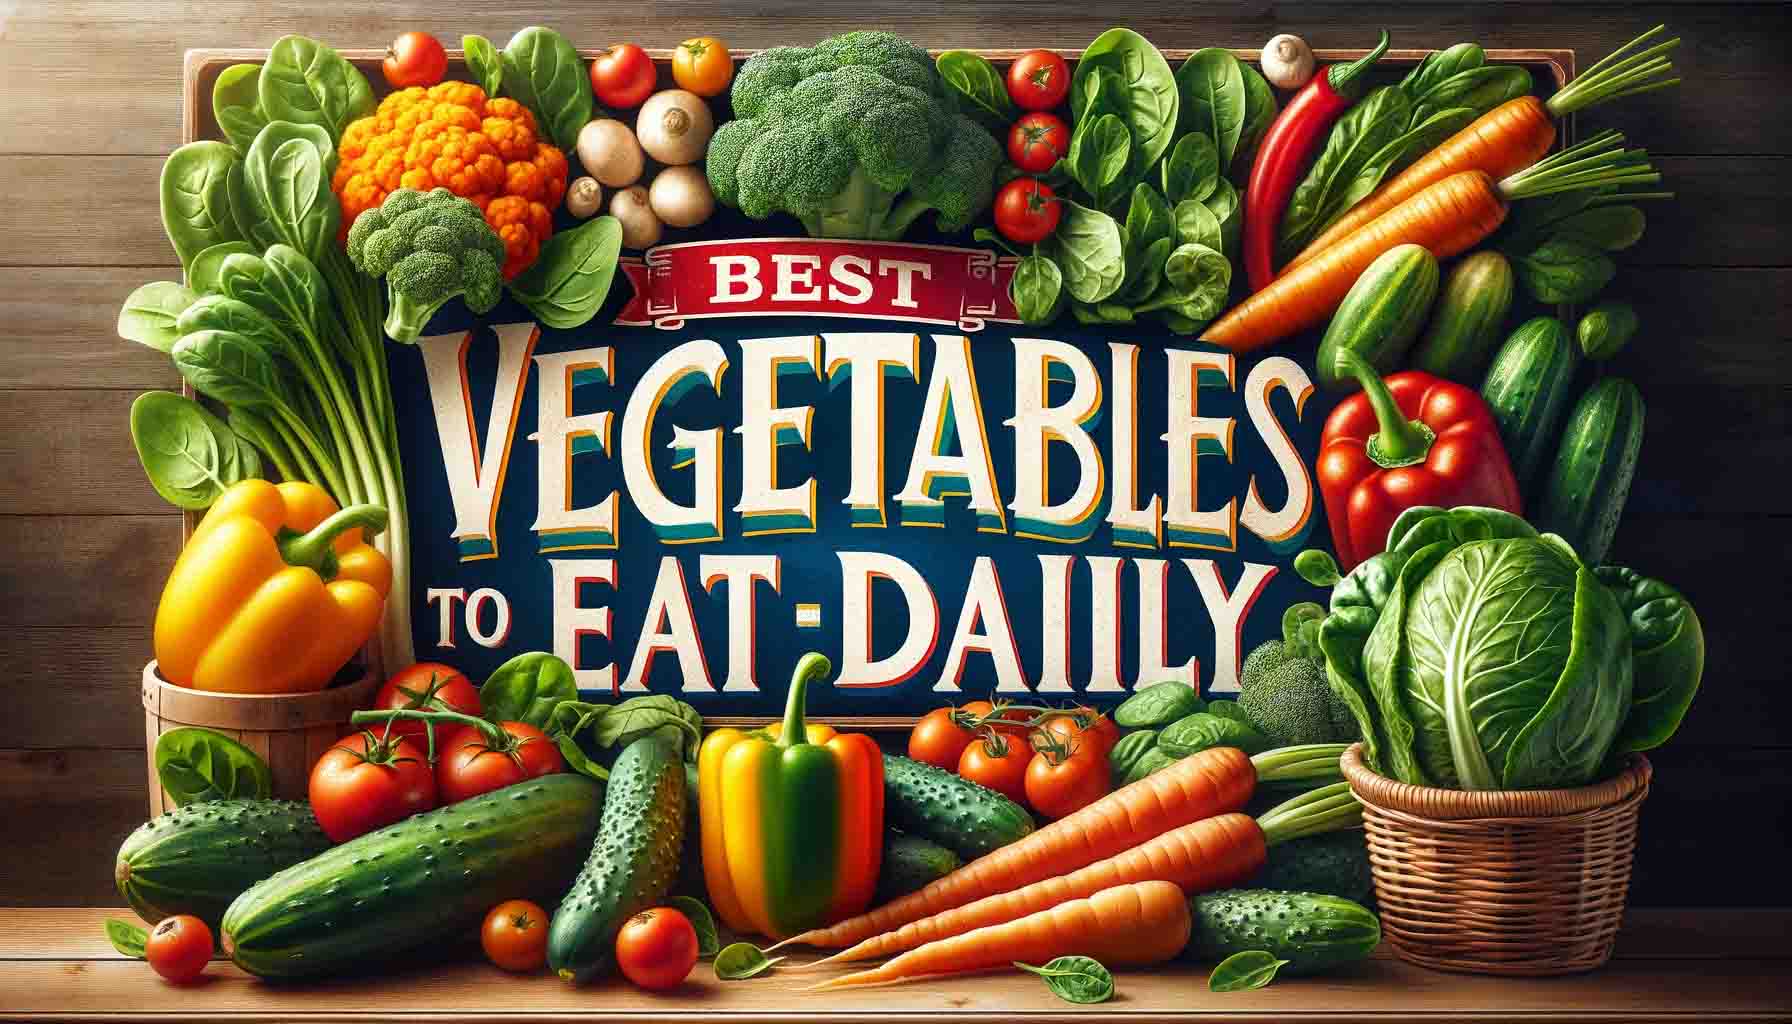 What are the best vegetables to eat daily